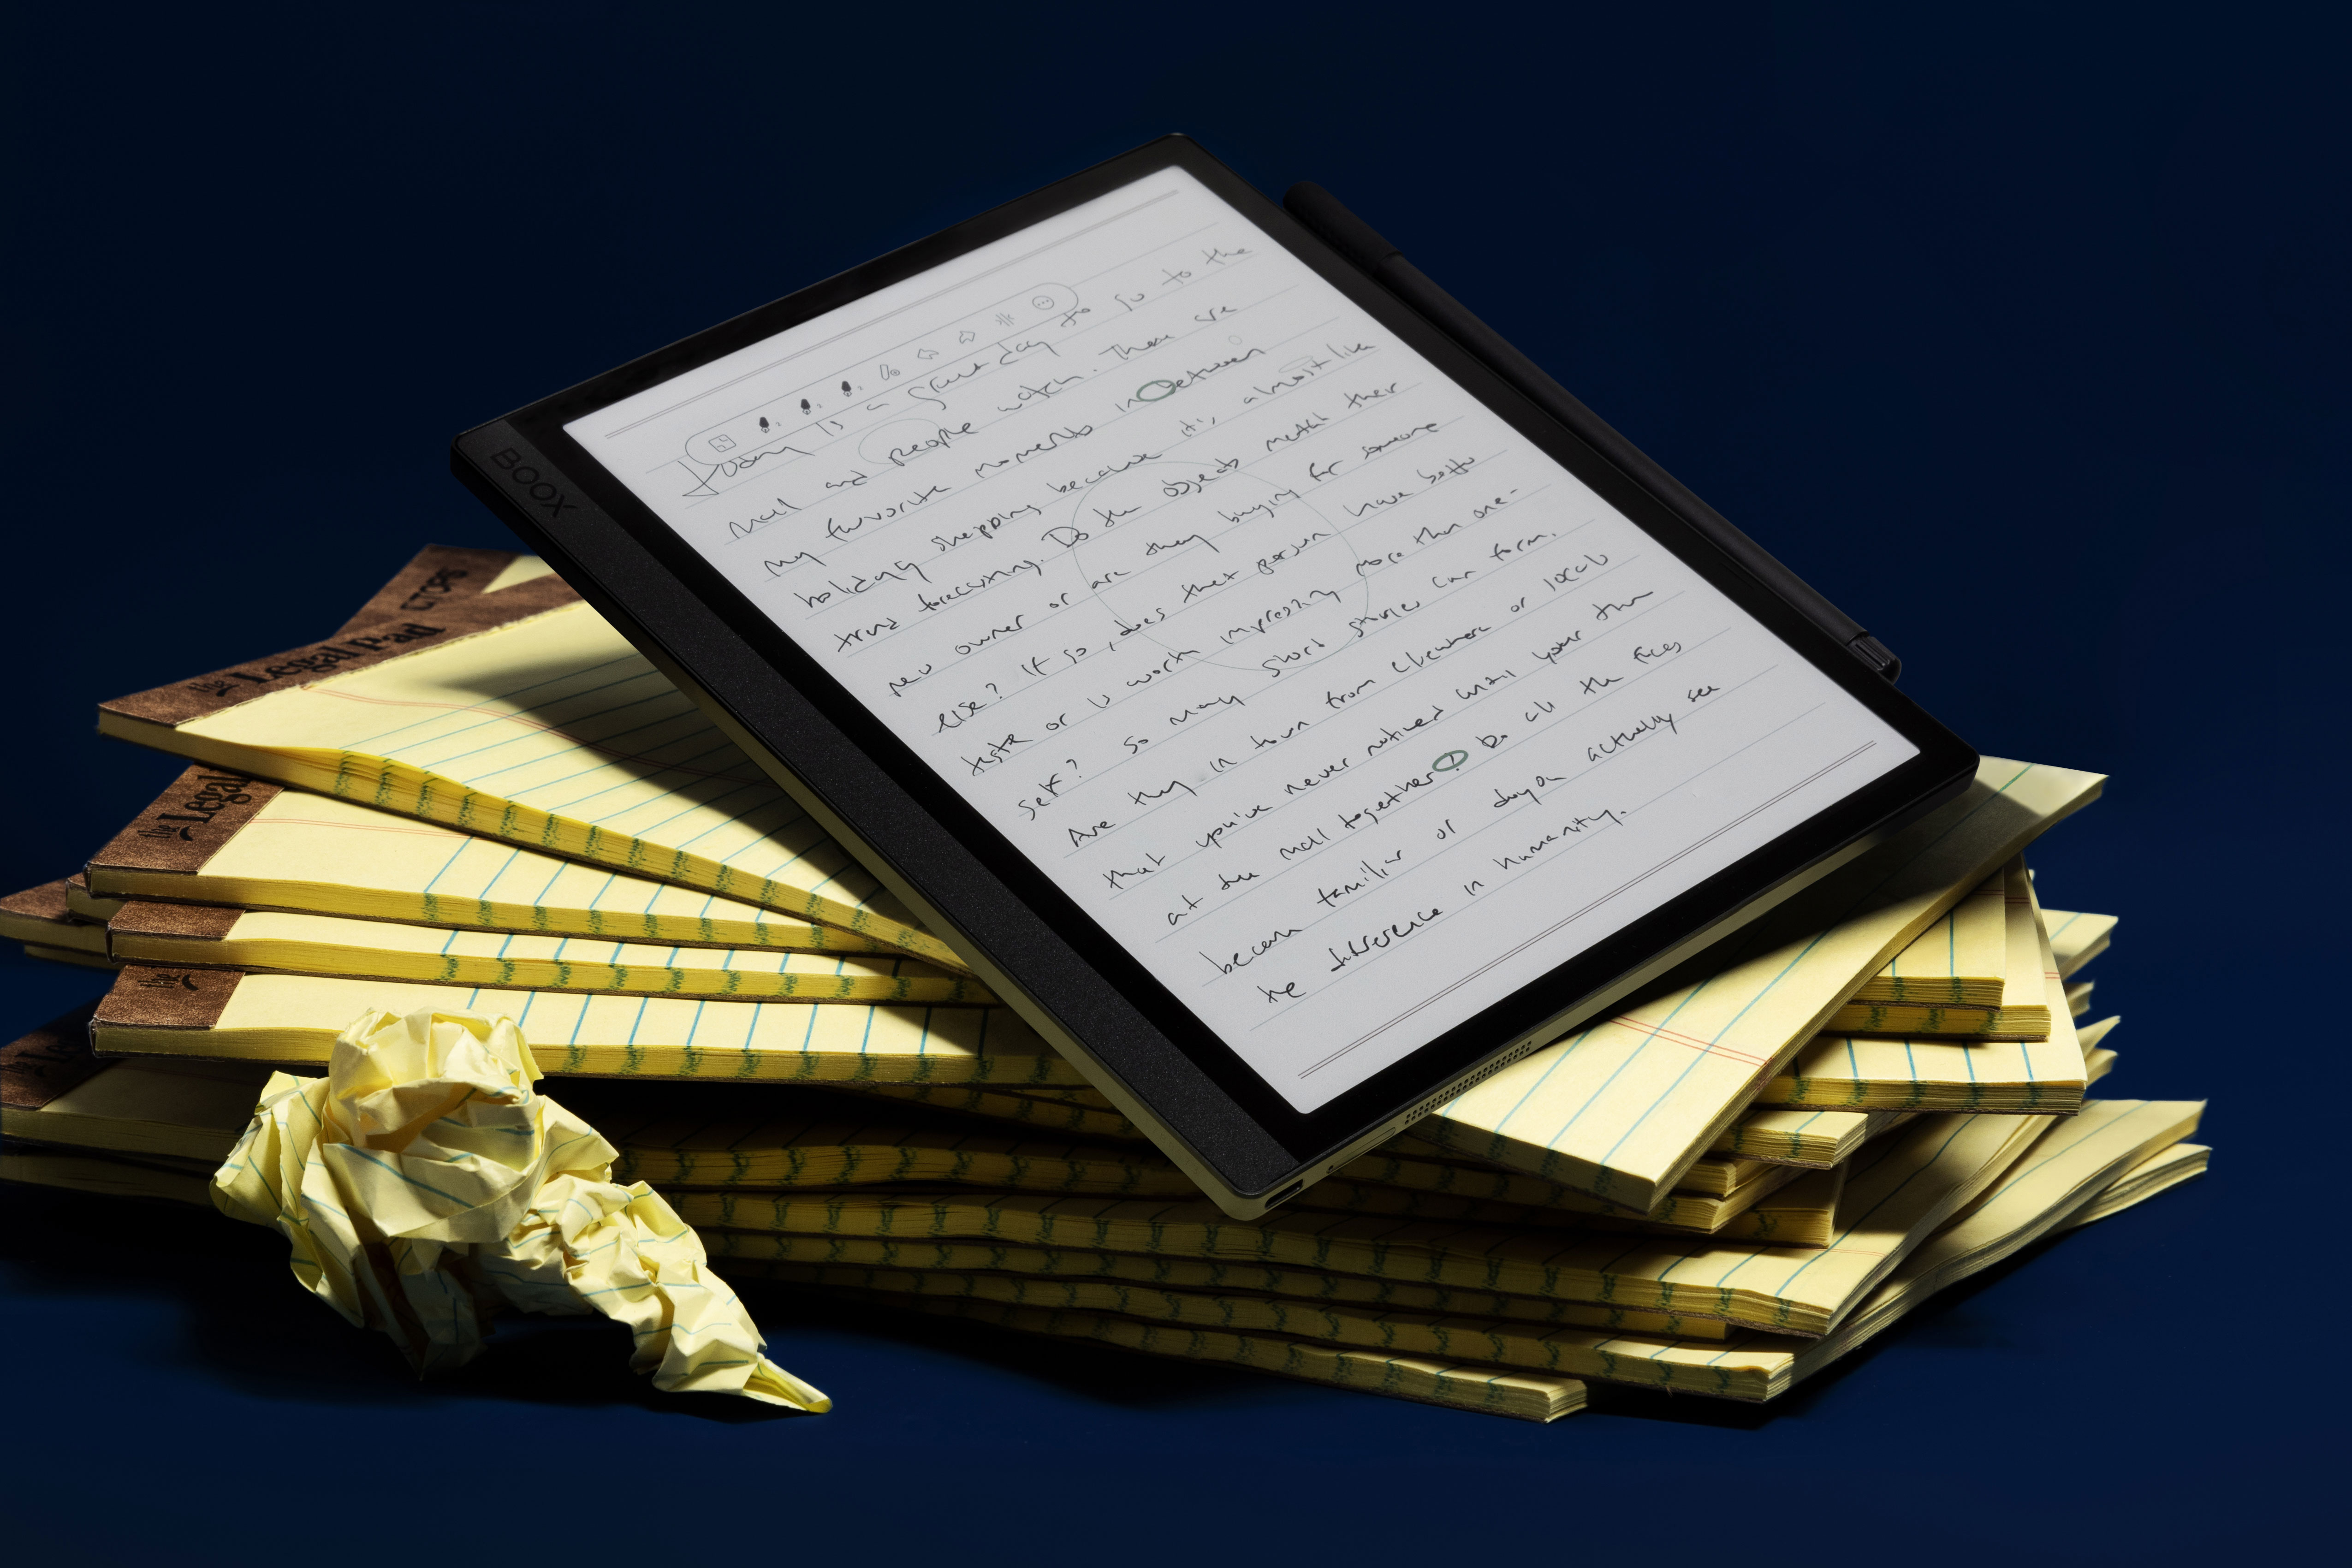 The reMarkable 2 is a gorgeous e-paper tablet begging for better software